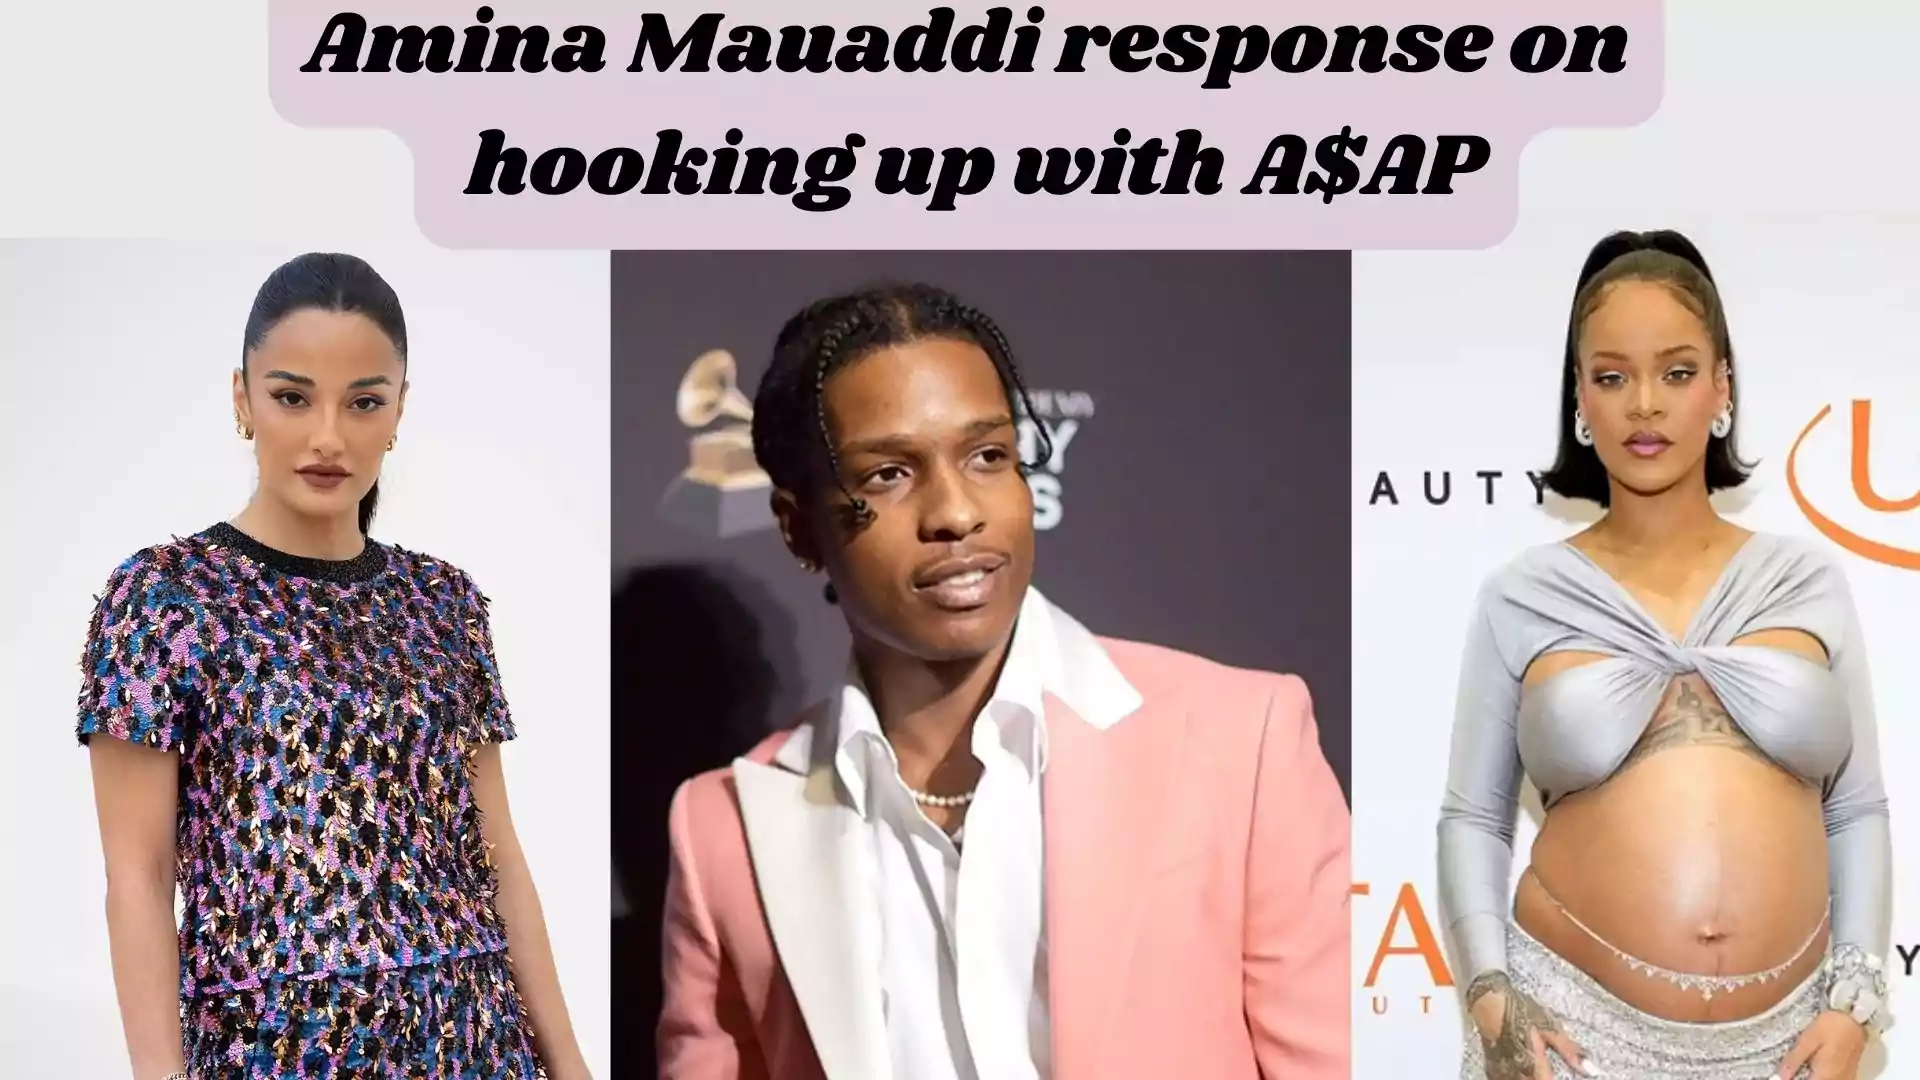 Amina Mauaddi response on hooking up with A$AP wallpaper and images